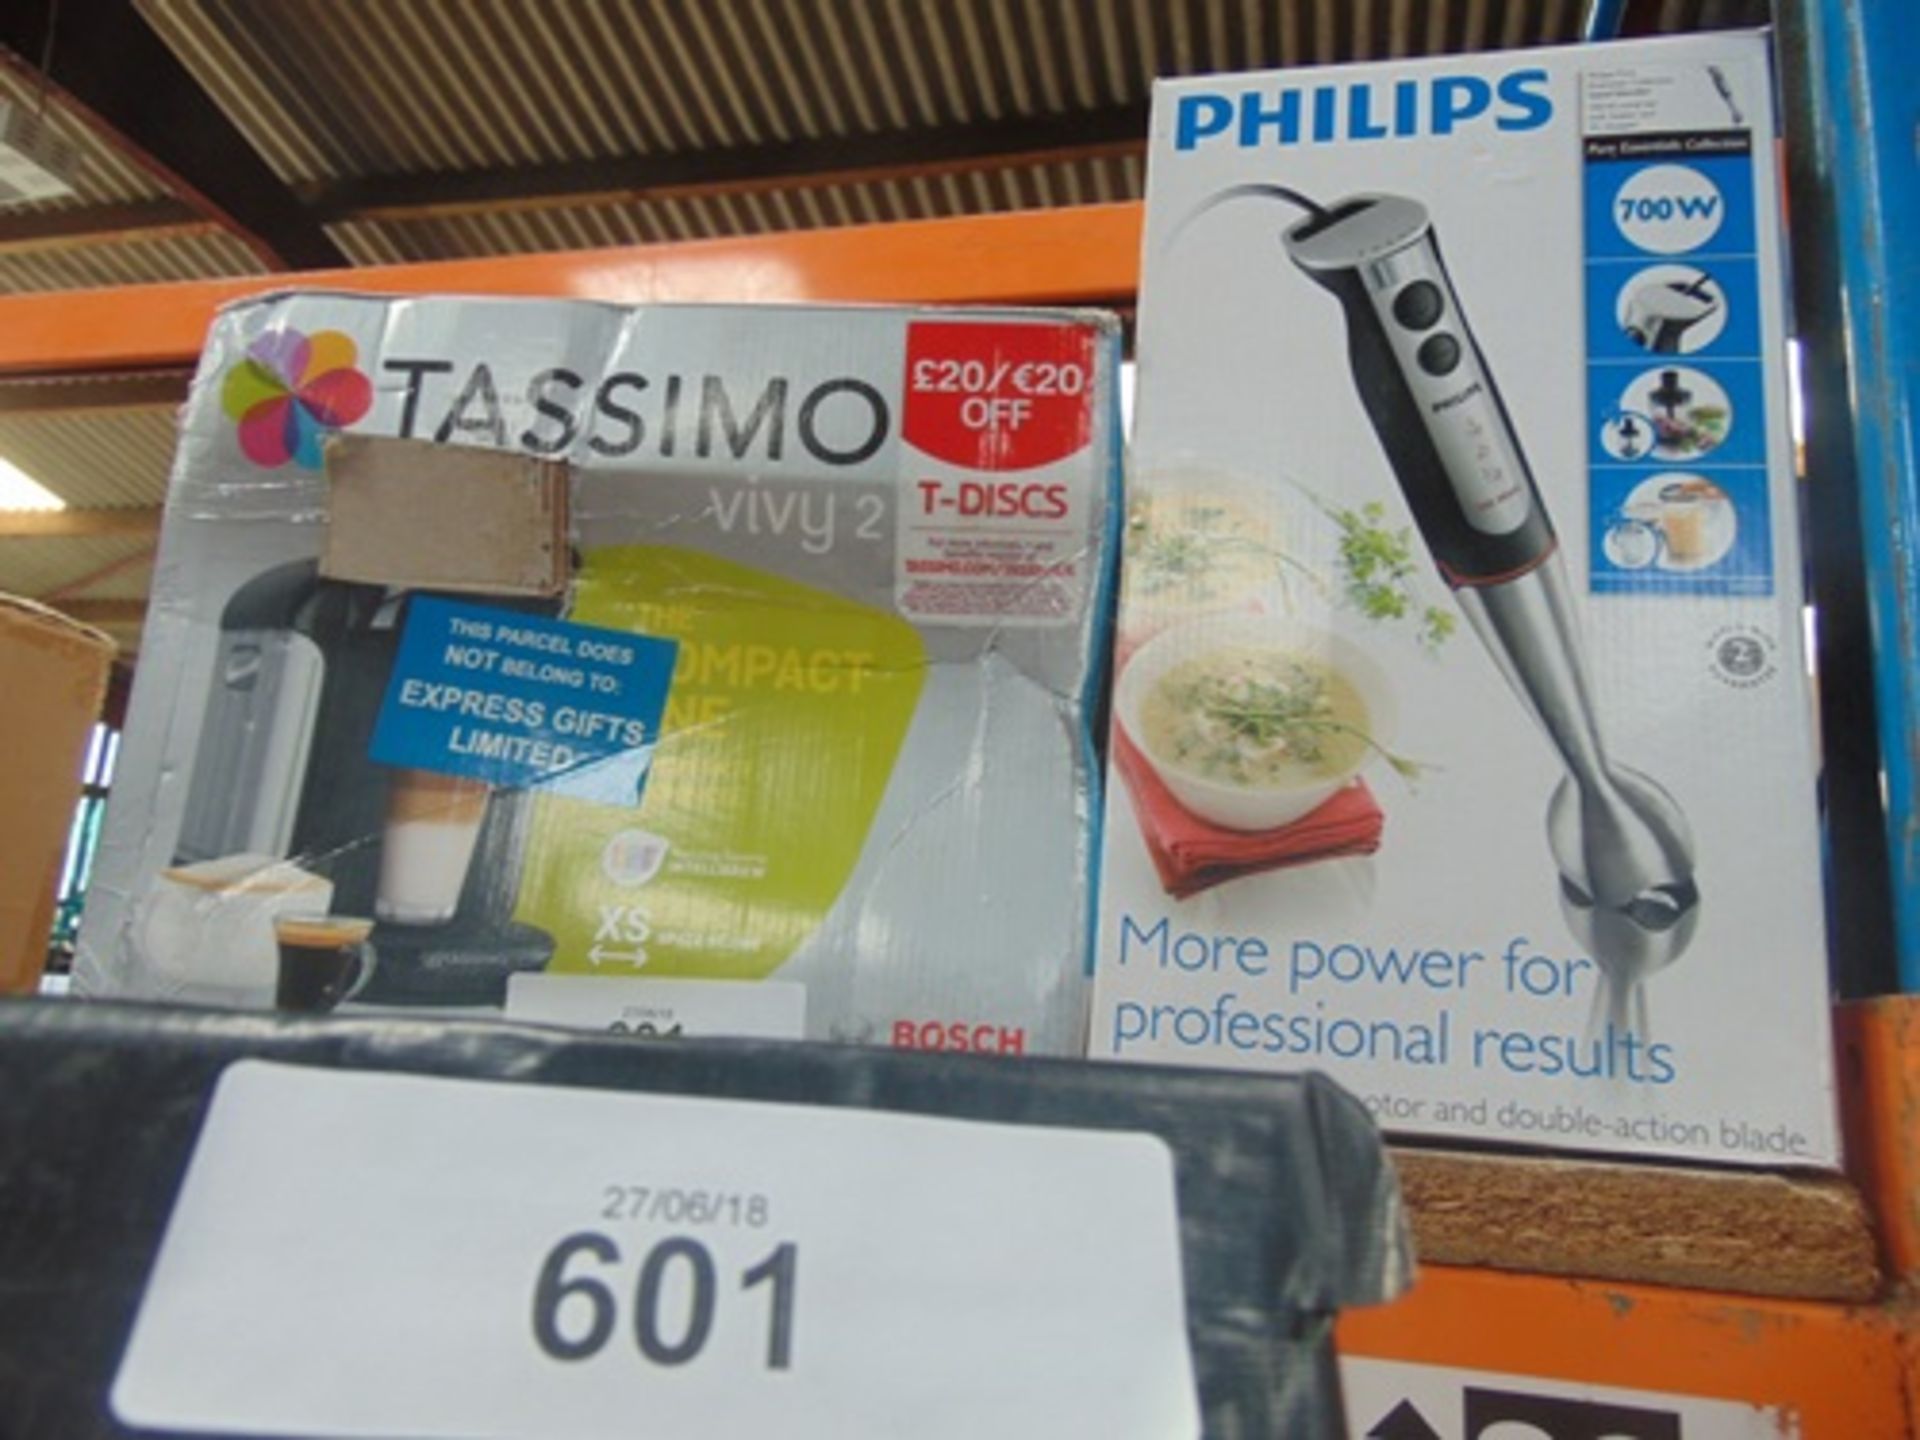 A Tassimo Vivy2 coffee machine together with a Philips 700W hand held blender - Condition - Mixed (